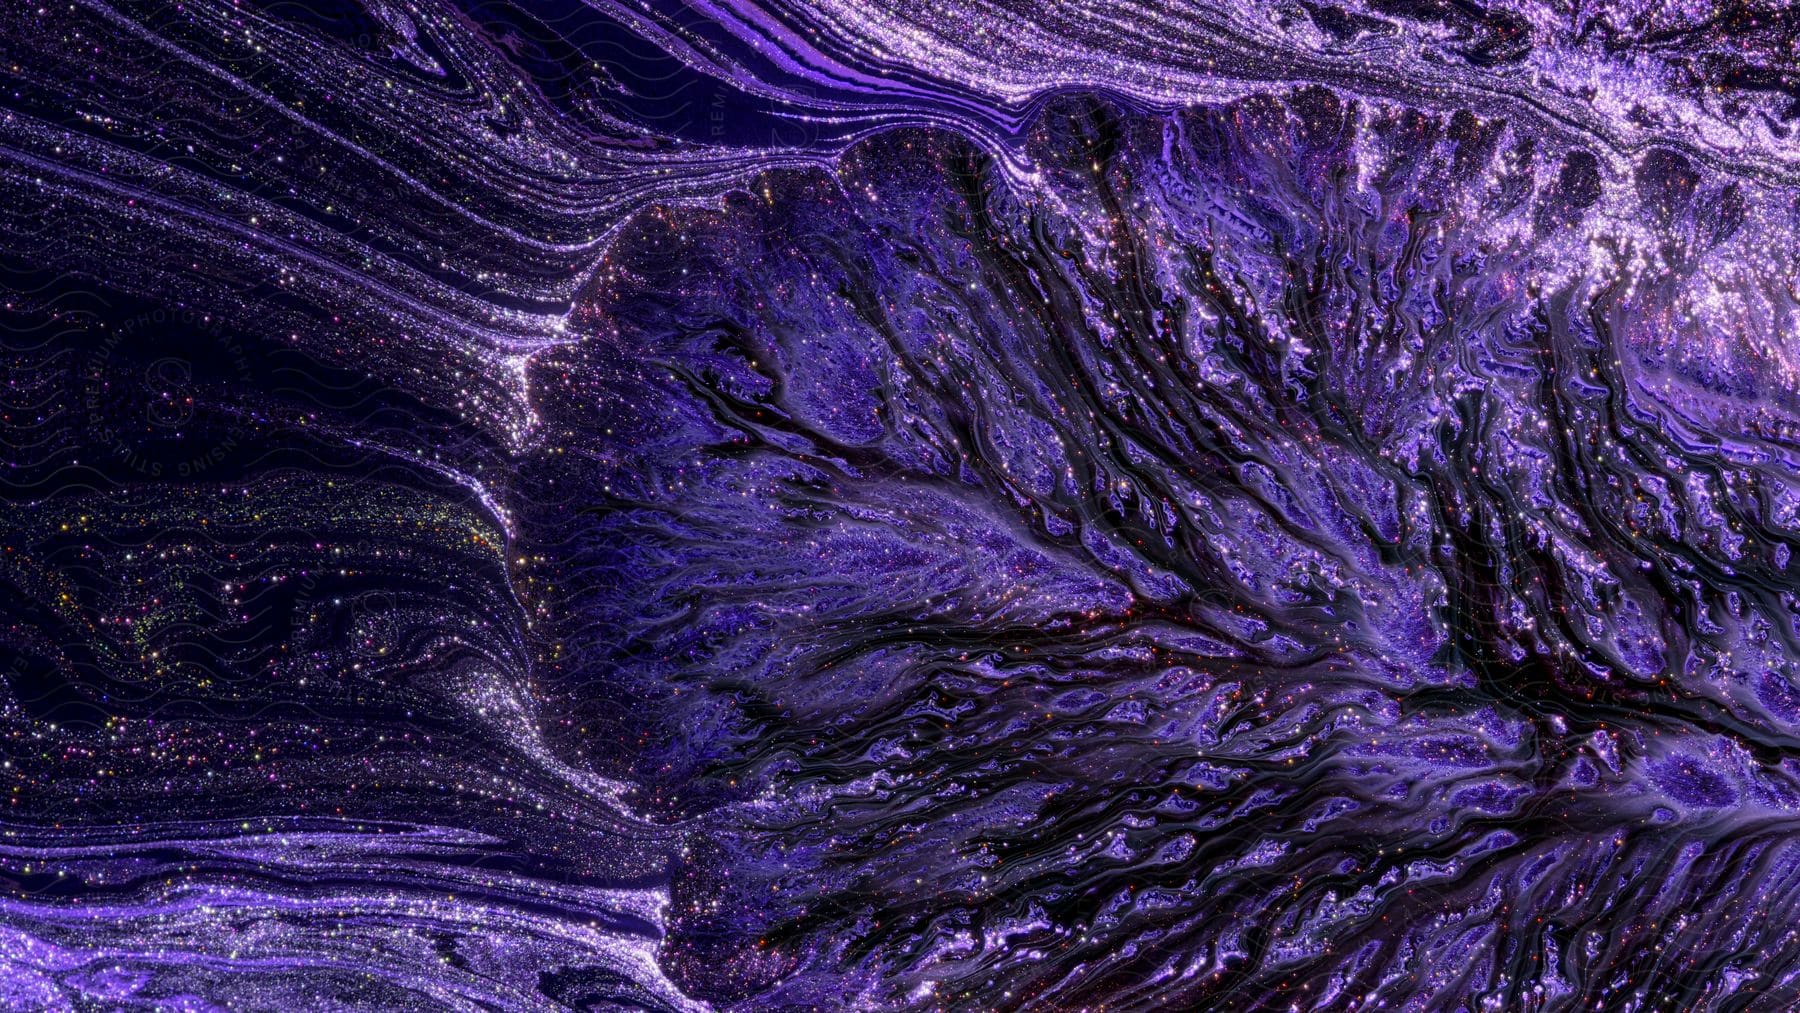 Lavender stripes and texture stretches across a dark purple sparkling substance